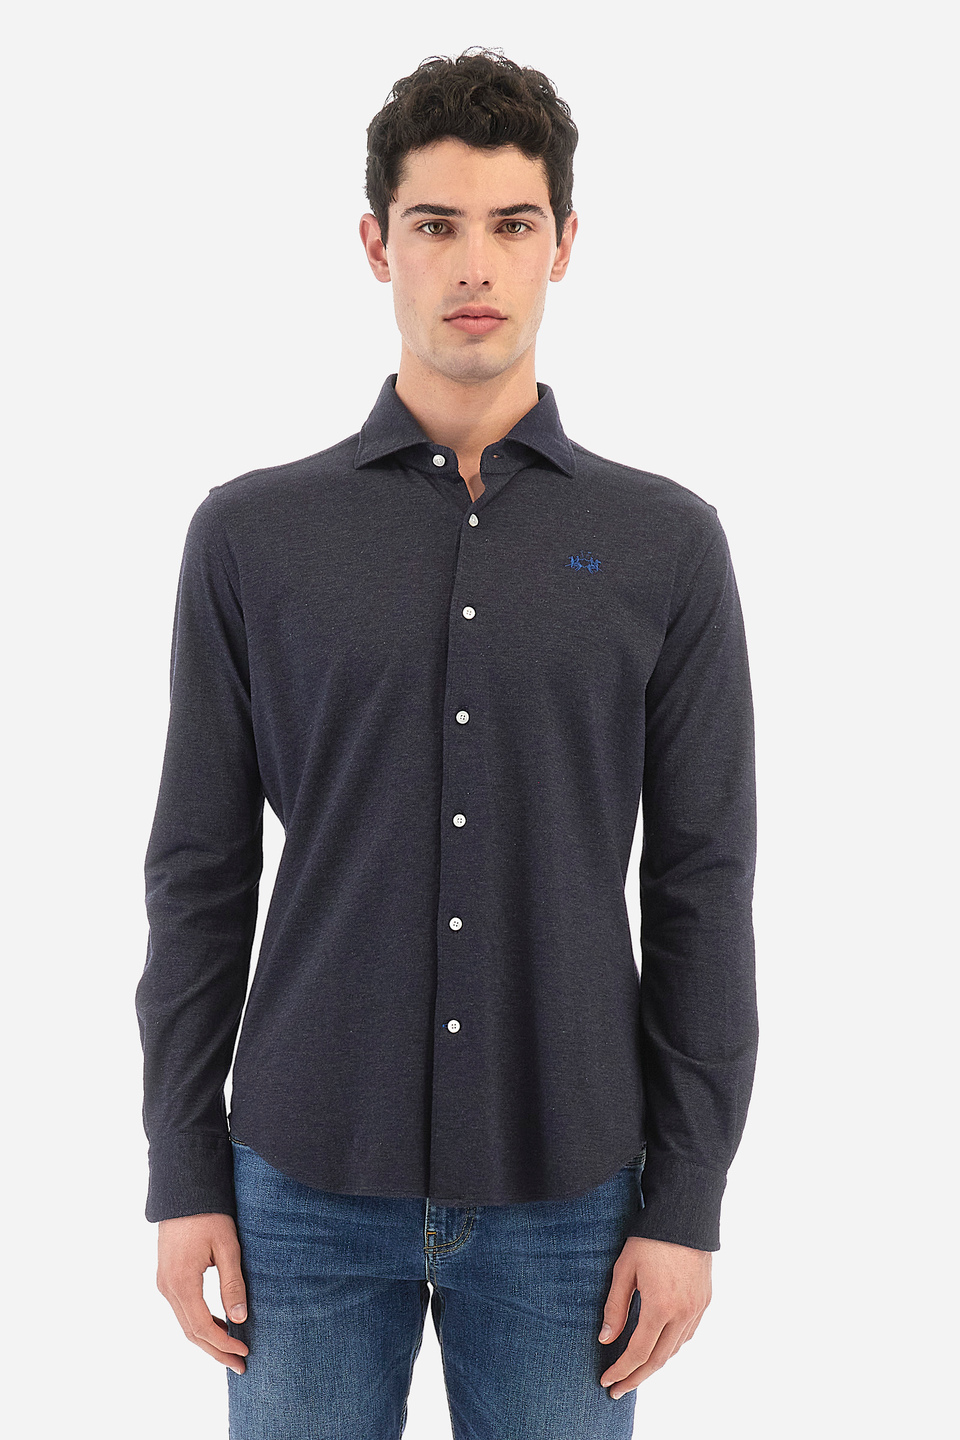 Long-sleeved shirt in cotton piqué, fitted cut for men - Qalam | La Martina - Official Online Shop